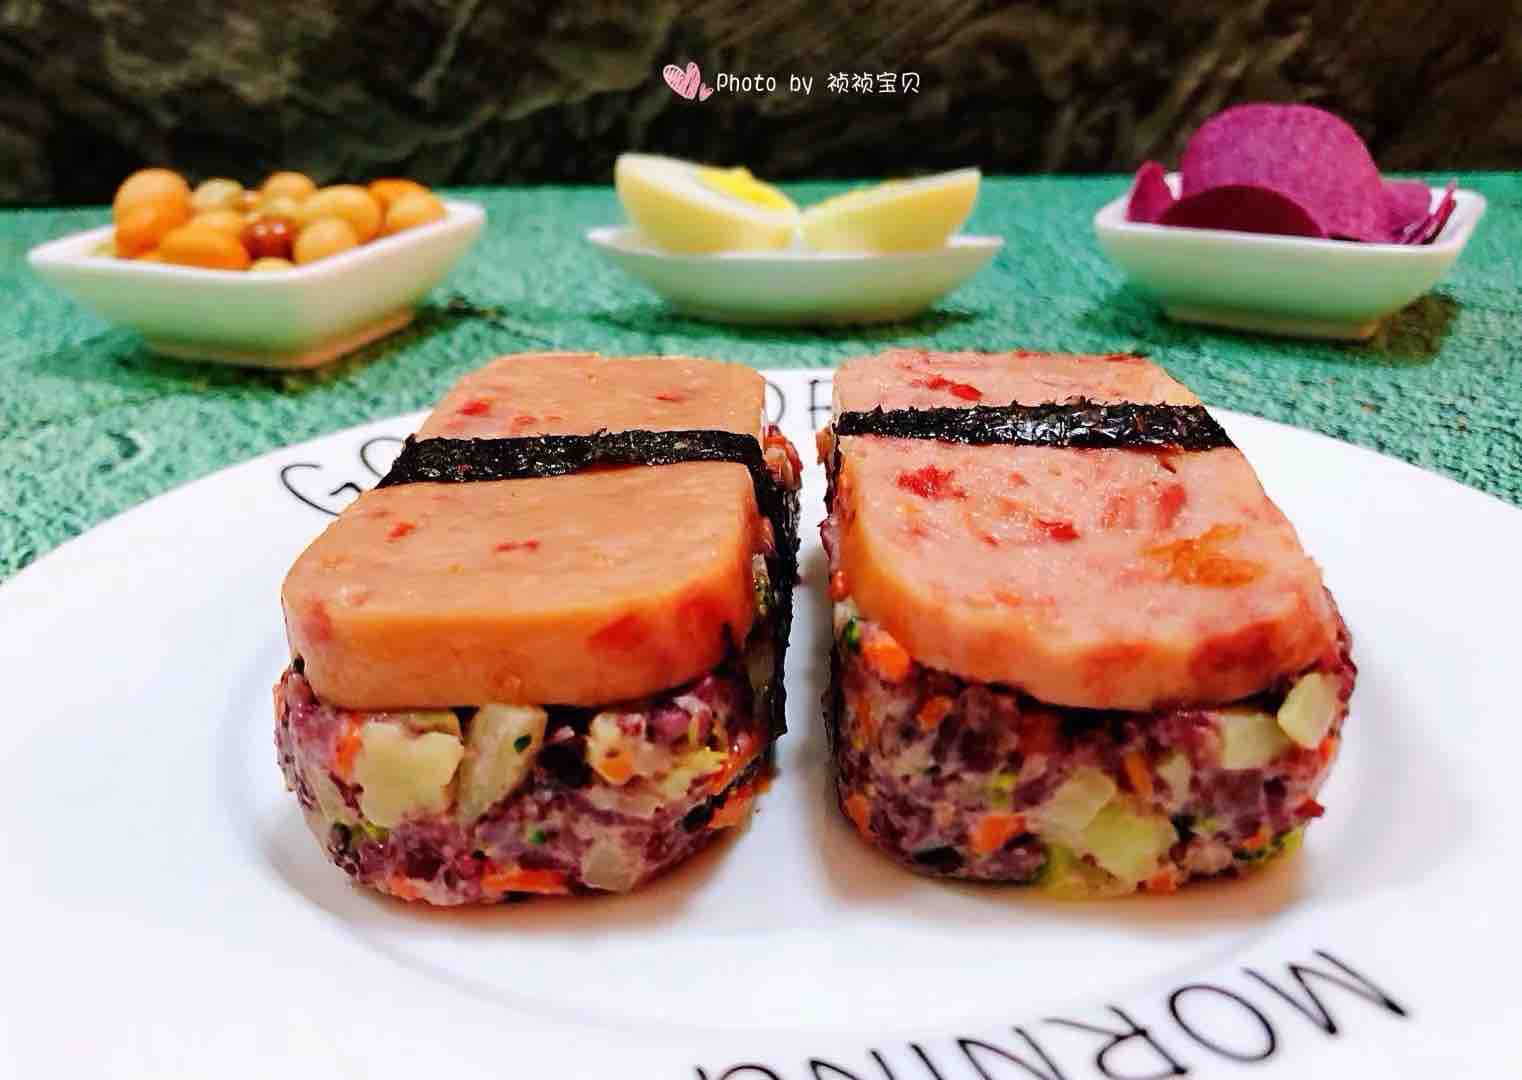 Luncheon Meat with Seasonal Vegetables Shuangmibao recipe